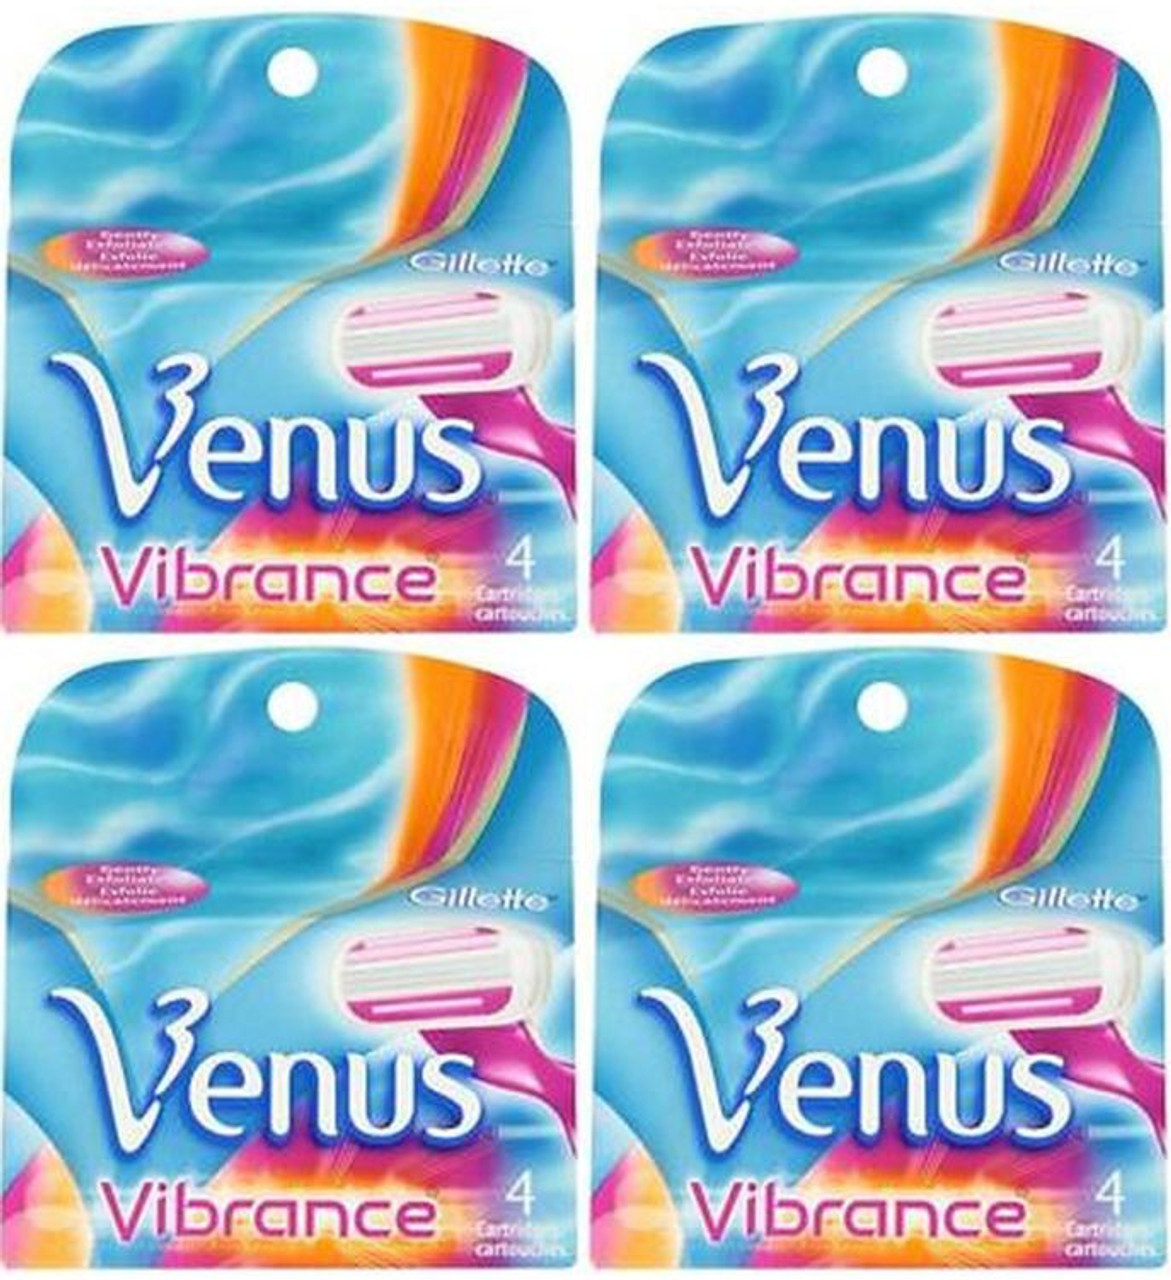 Tweet condoom Andes Gillette Venus Vibrance for Women Refill Cartridges, 4 Ct, 4 PACKS -  Nationwide Campus